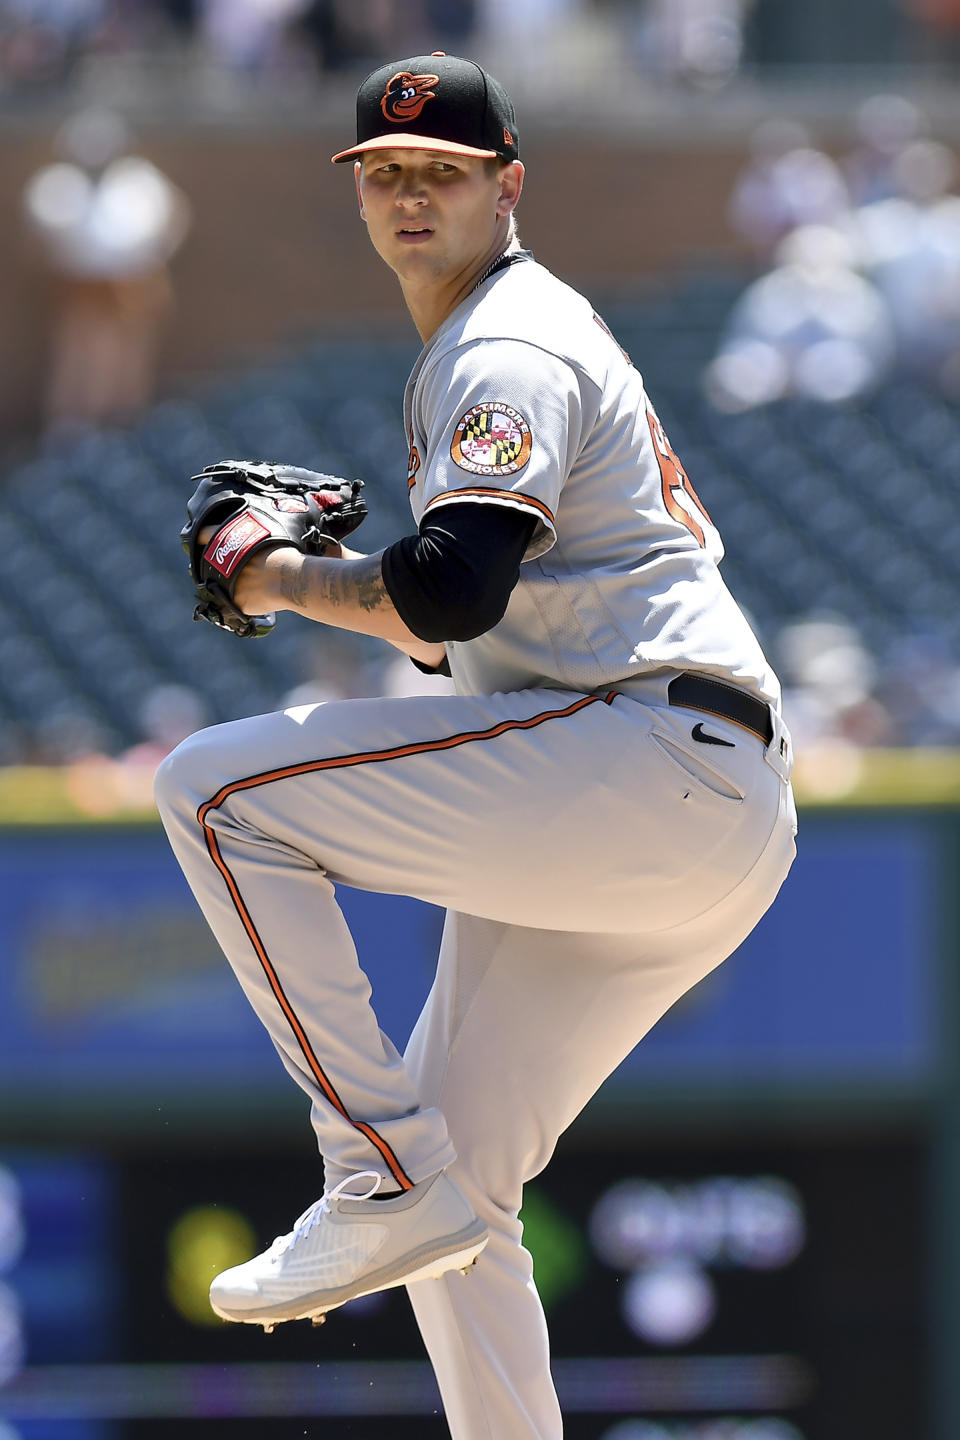 Baltimore Orioles pitcher Tyler Wells winds up to throw in the first inning of a baseball game against the Detroit Tigers in Detroit, Sunday, May 15, 2022. (AP Photo/Lon Horwedel)